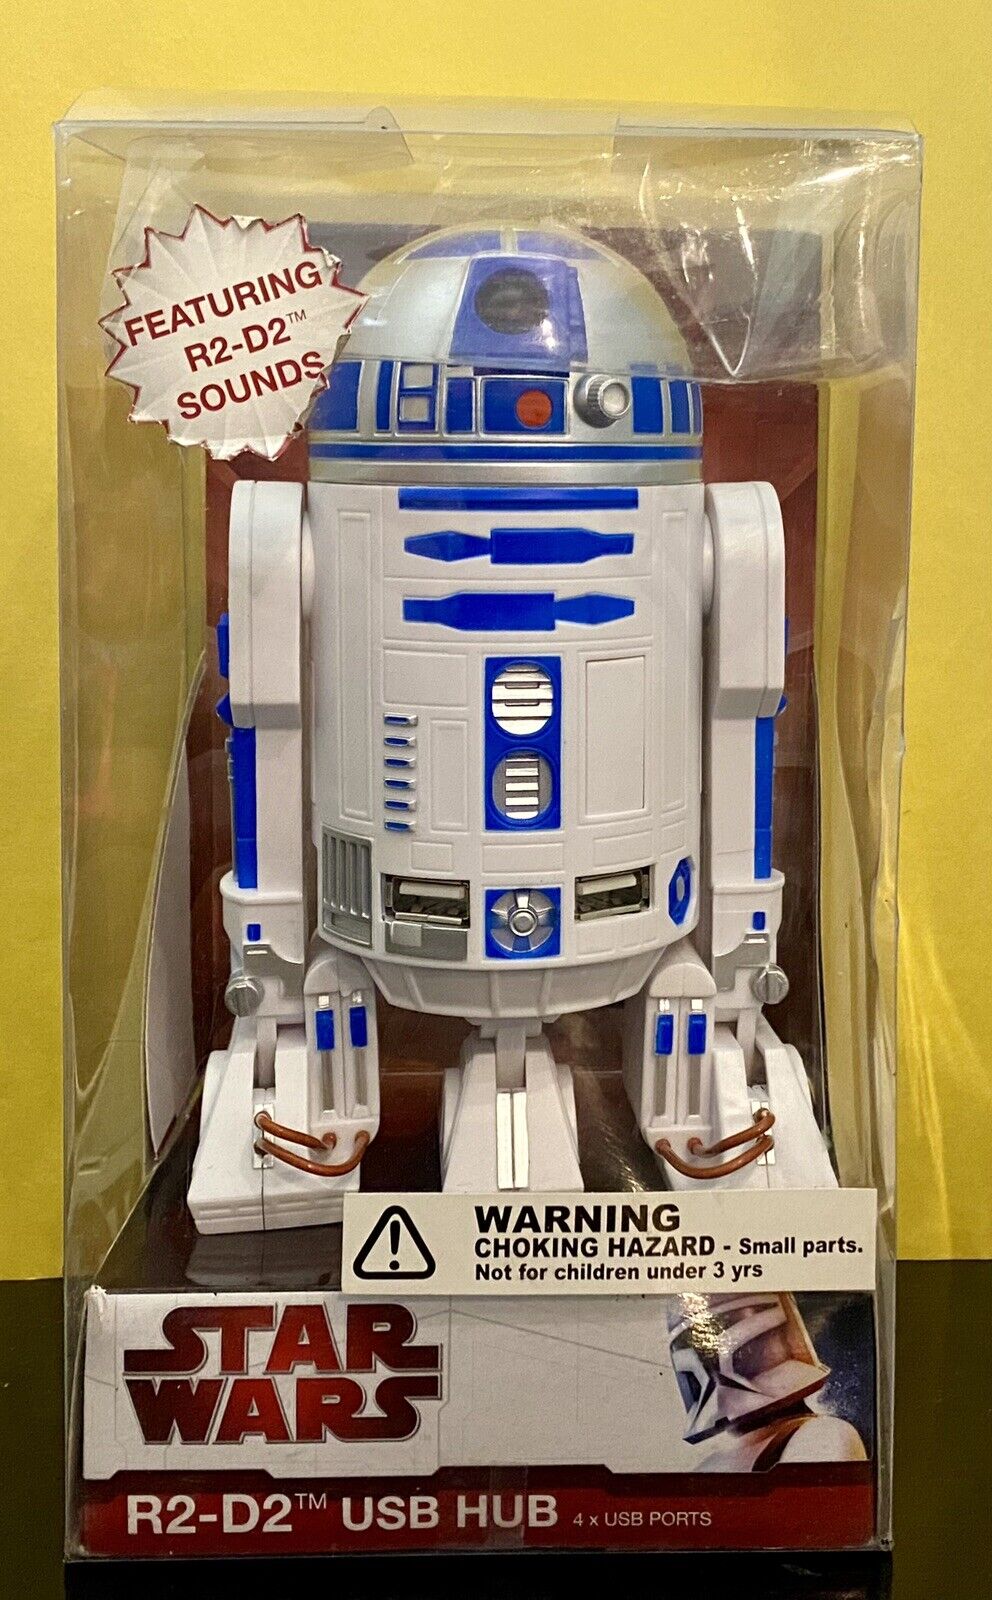 Star Wars R2-D2 USB Hub 4 Port USB With Sounds 2009 Edition NEW IN BOX